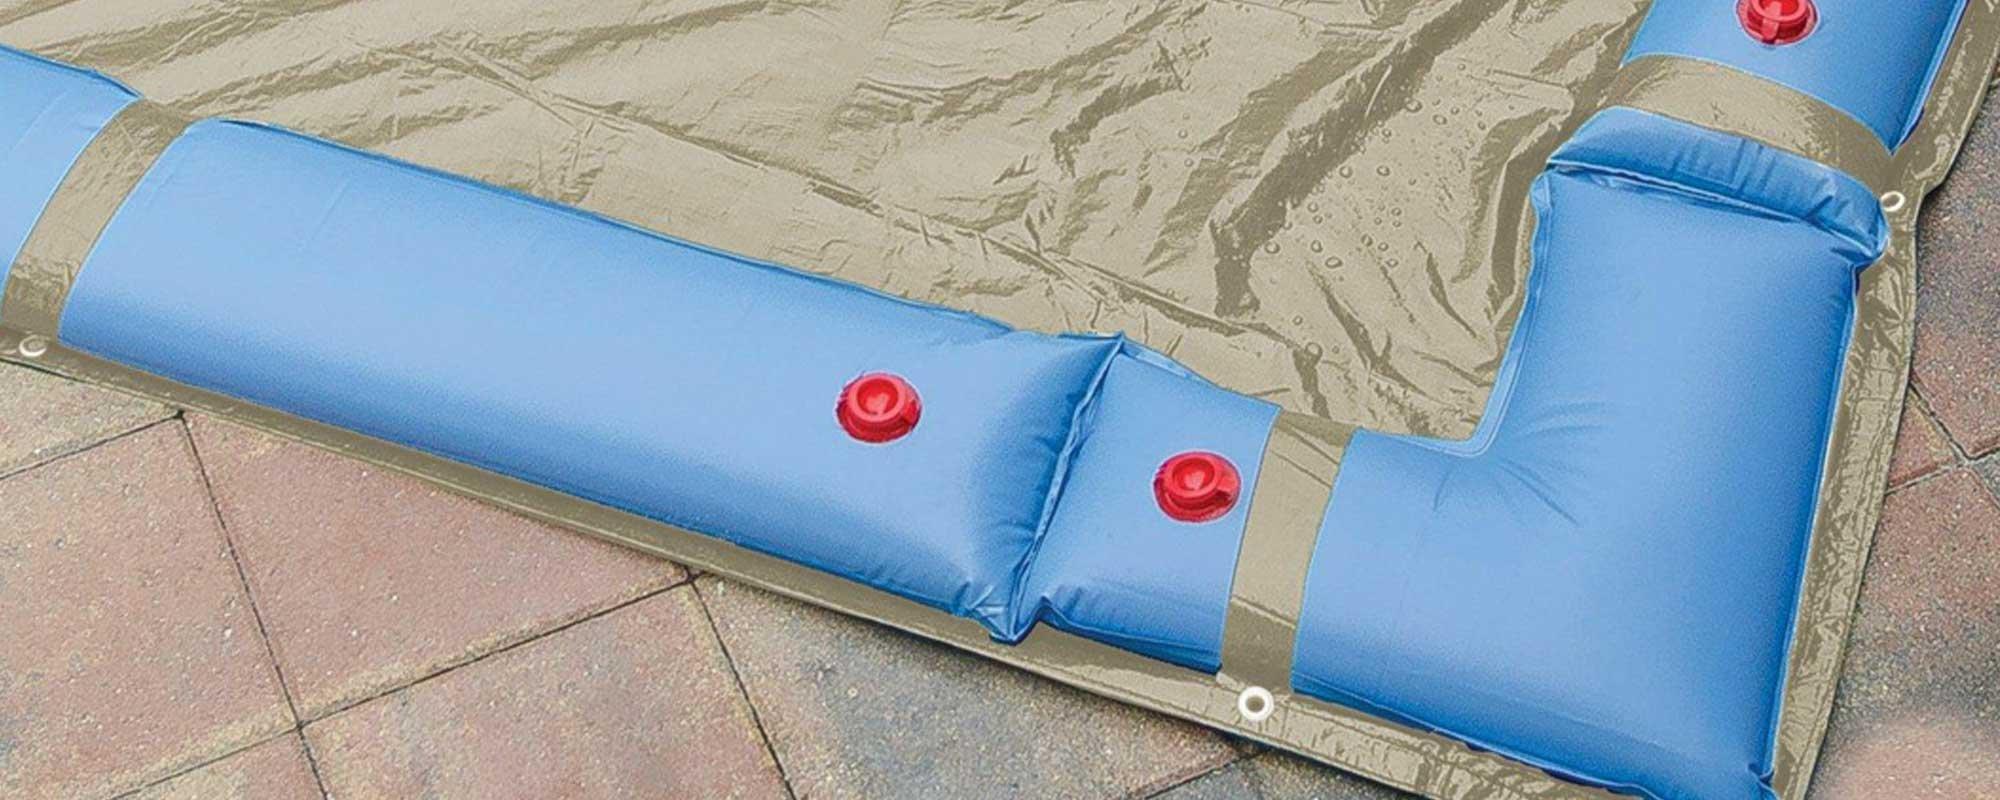 winter pool cover with water bag weights